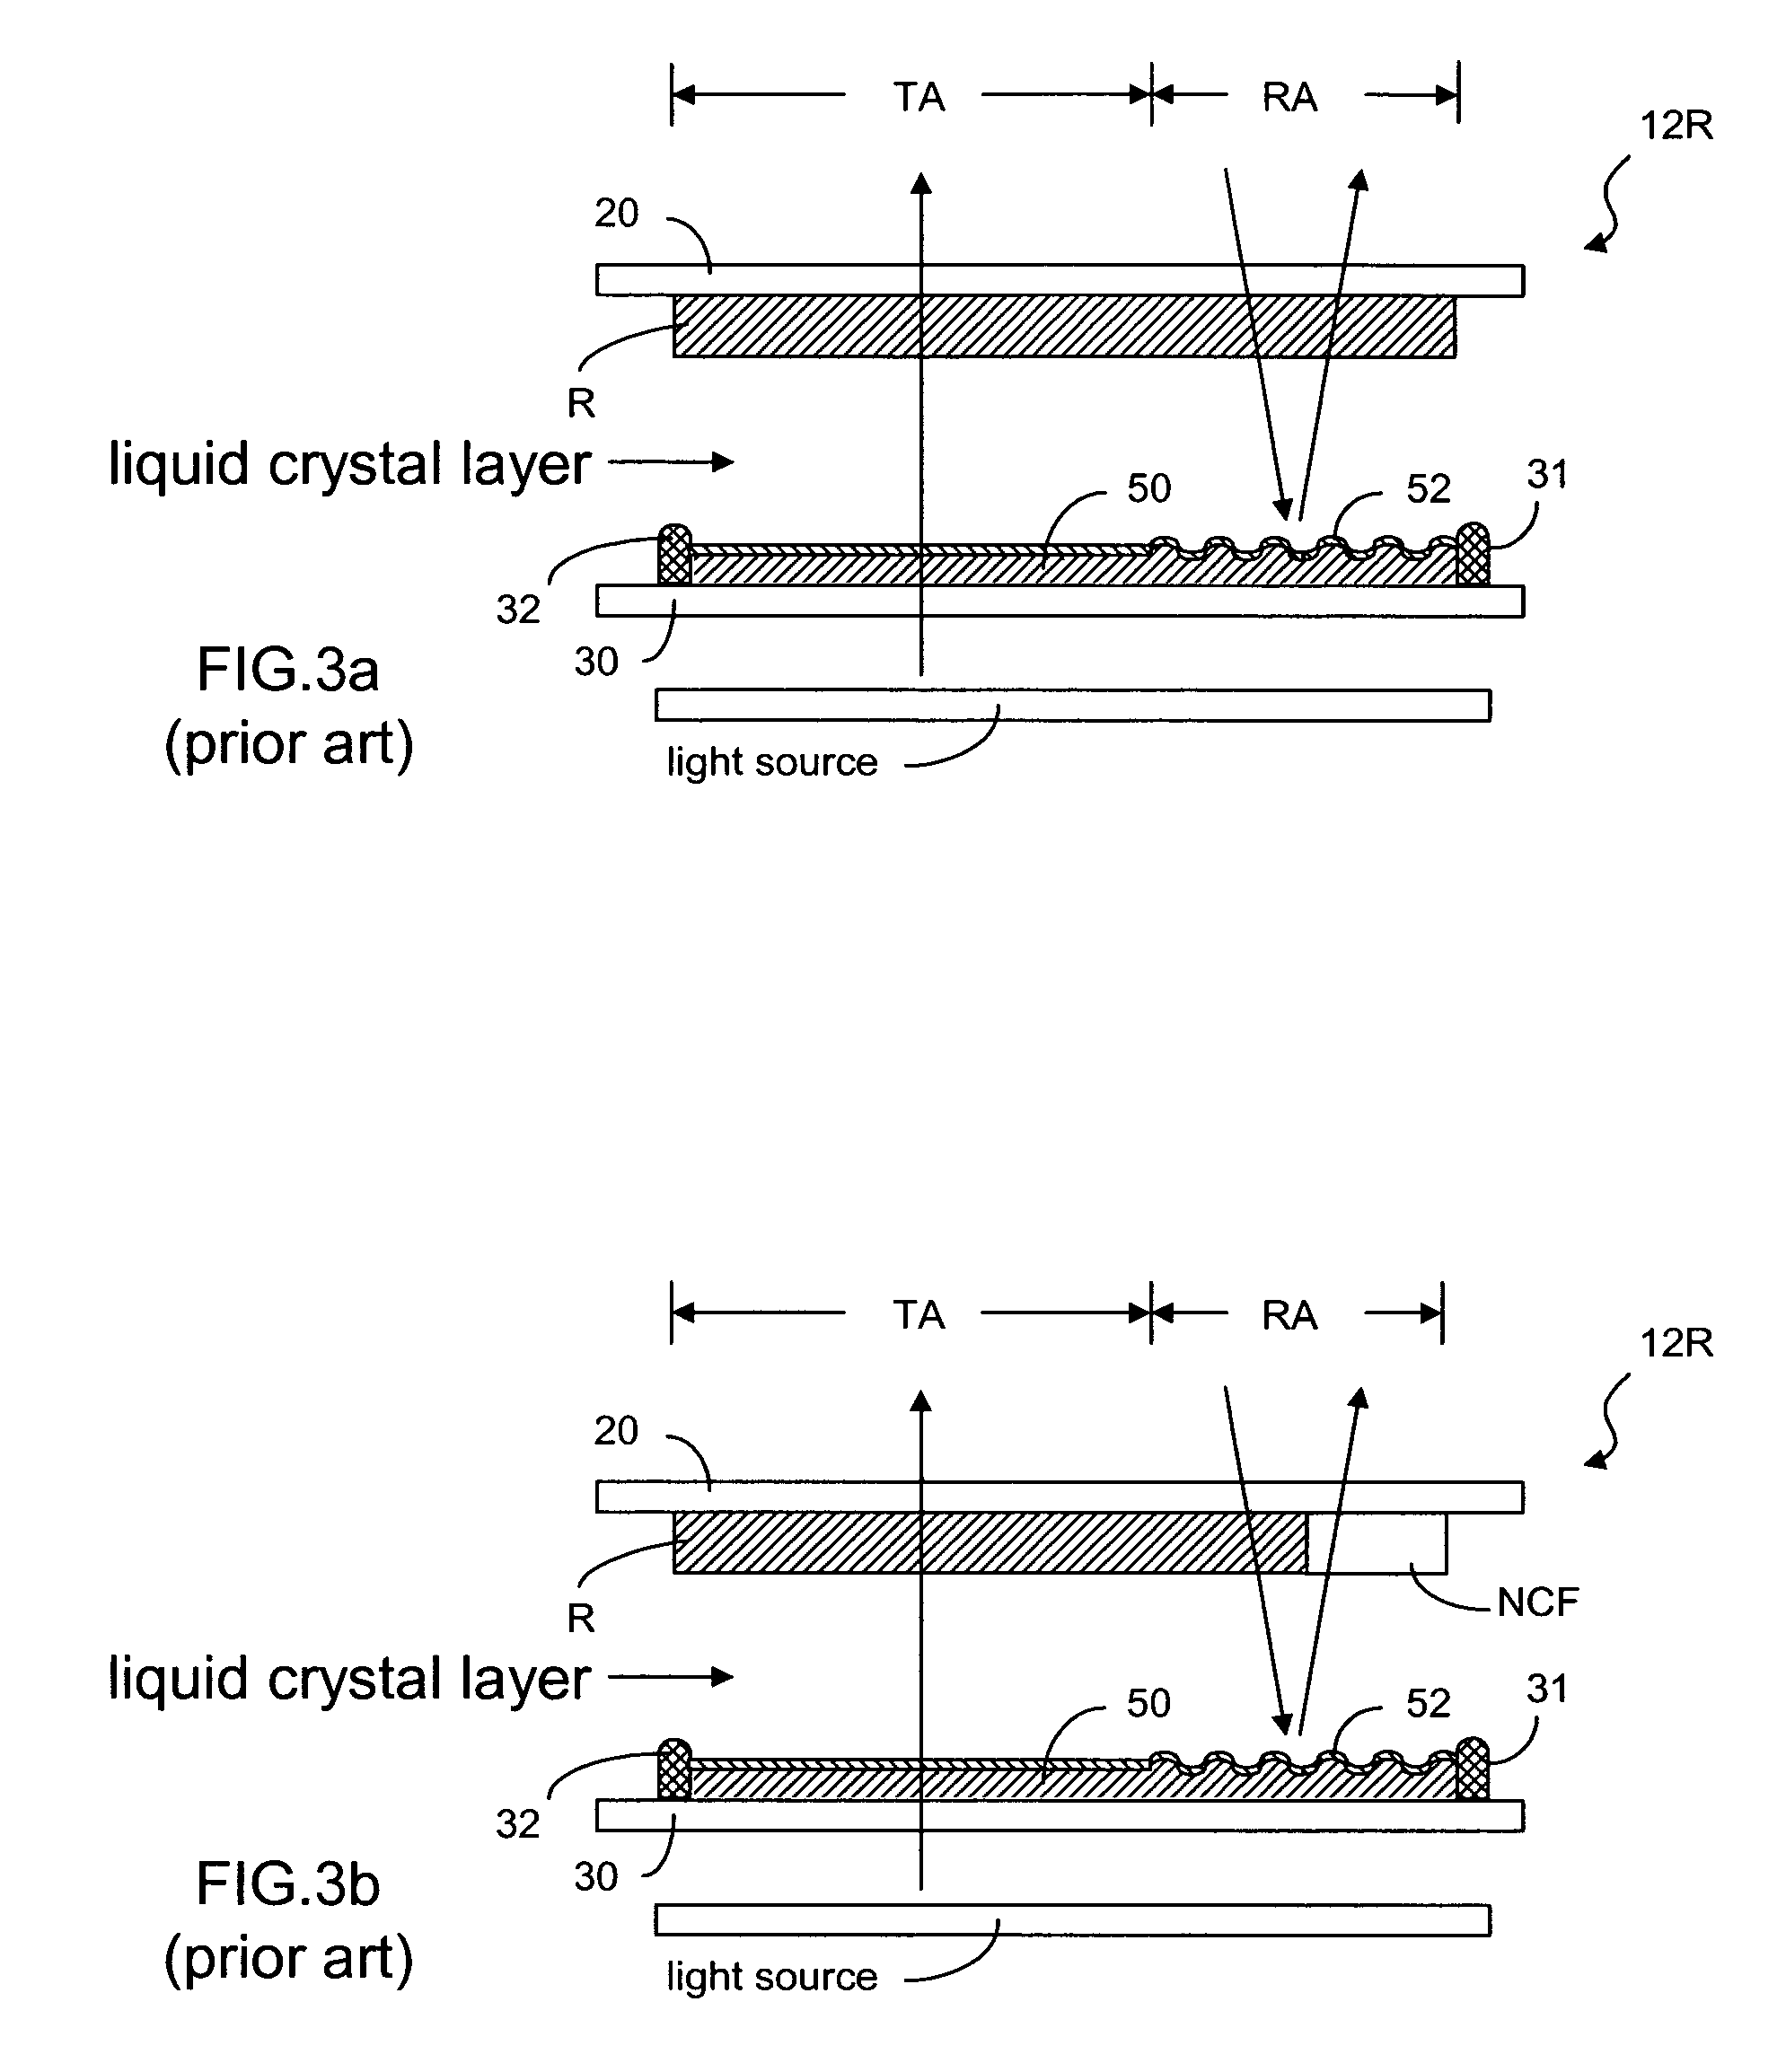 Transflective liquid crystal display with partially shifted reflectivity curve